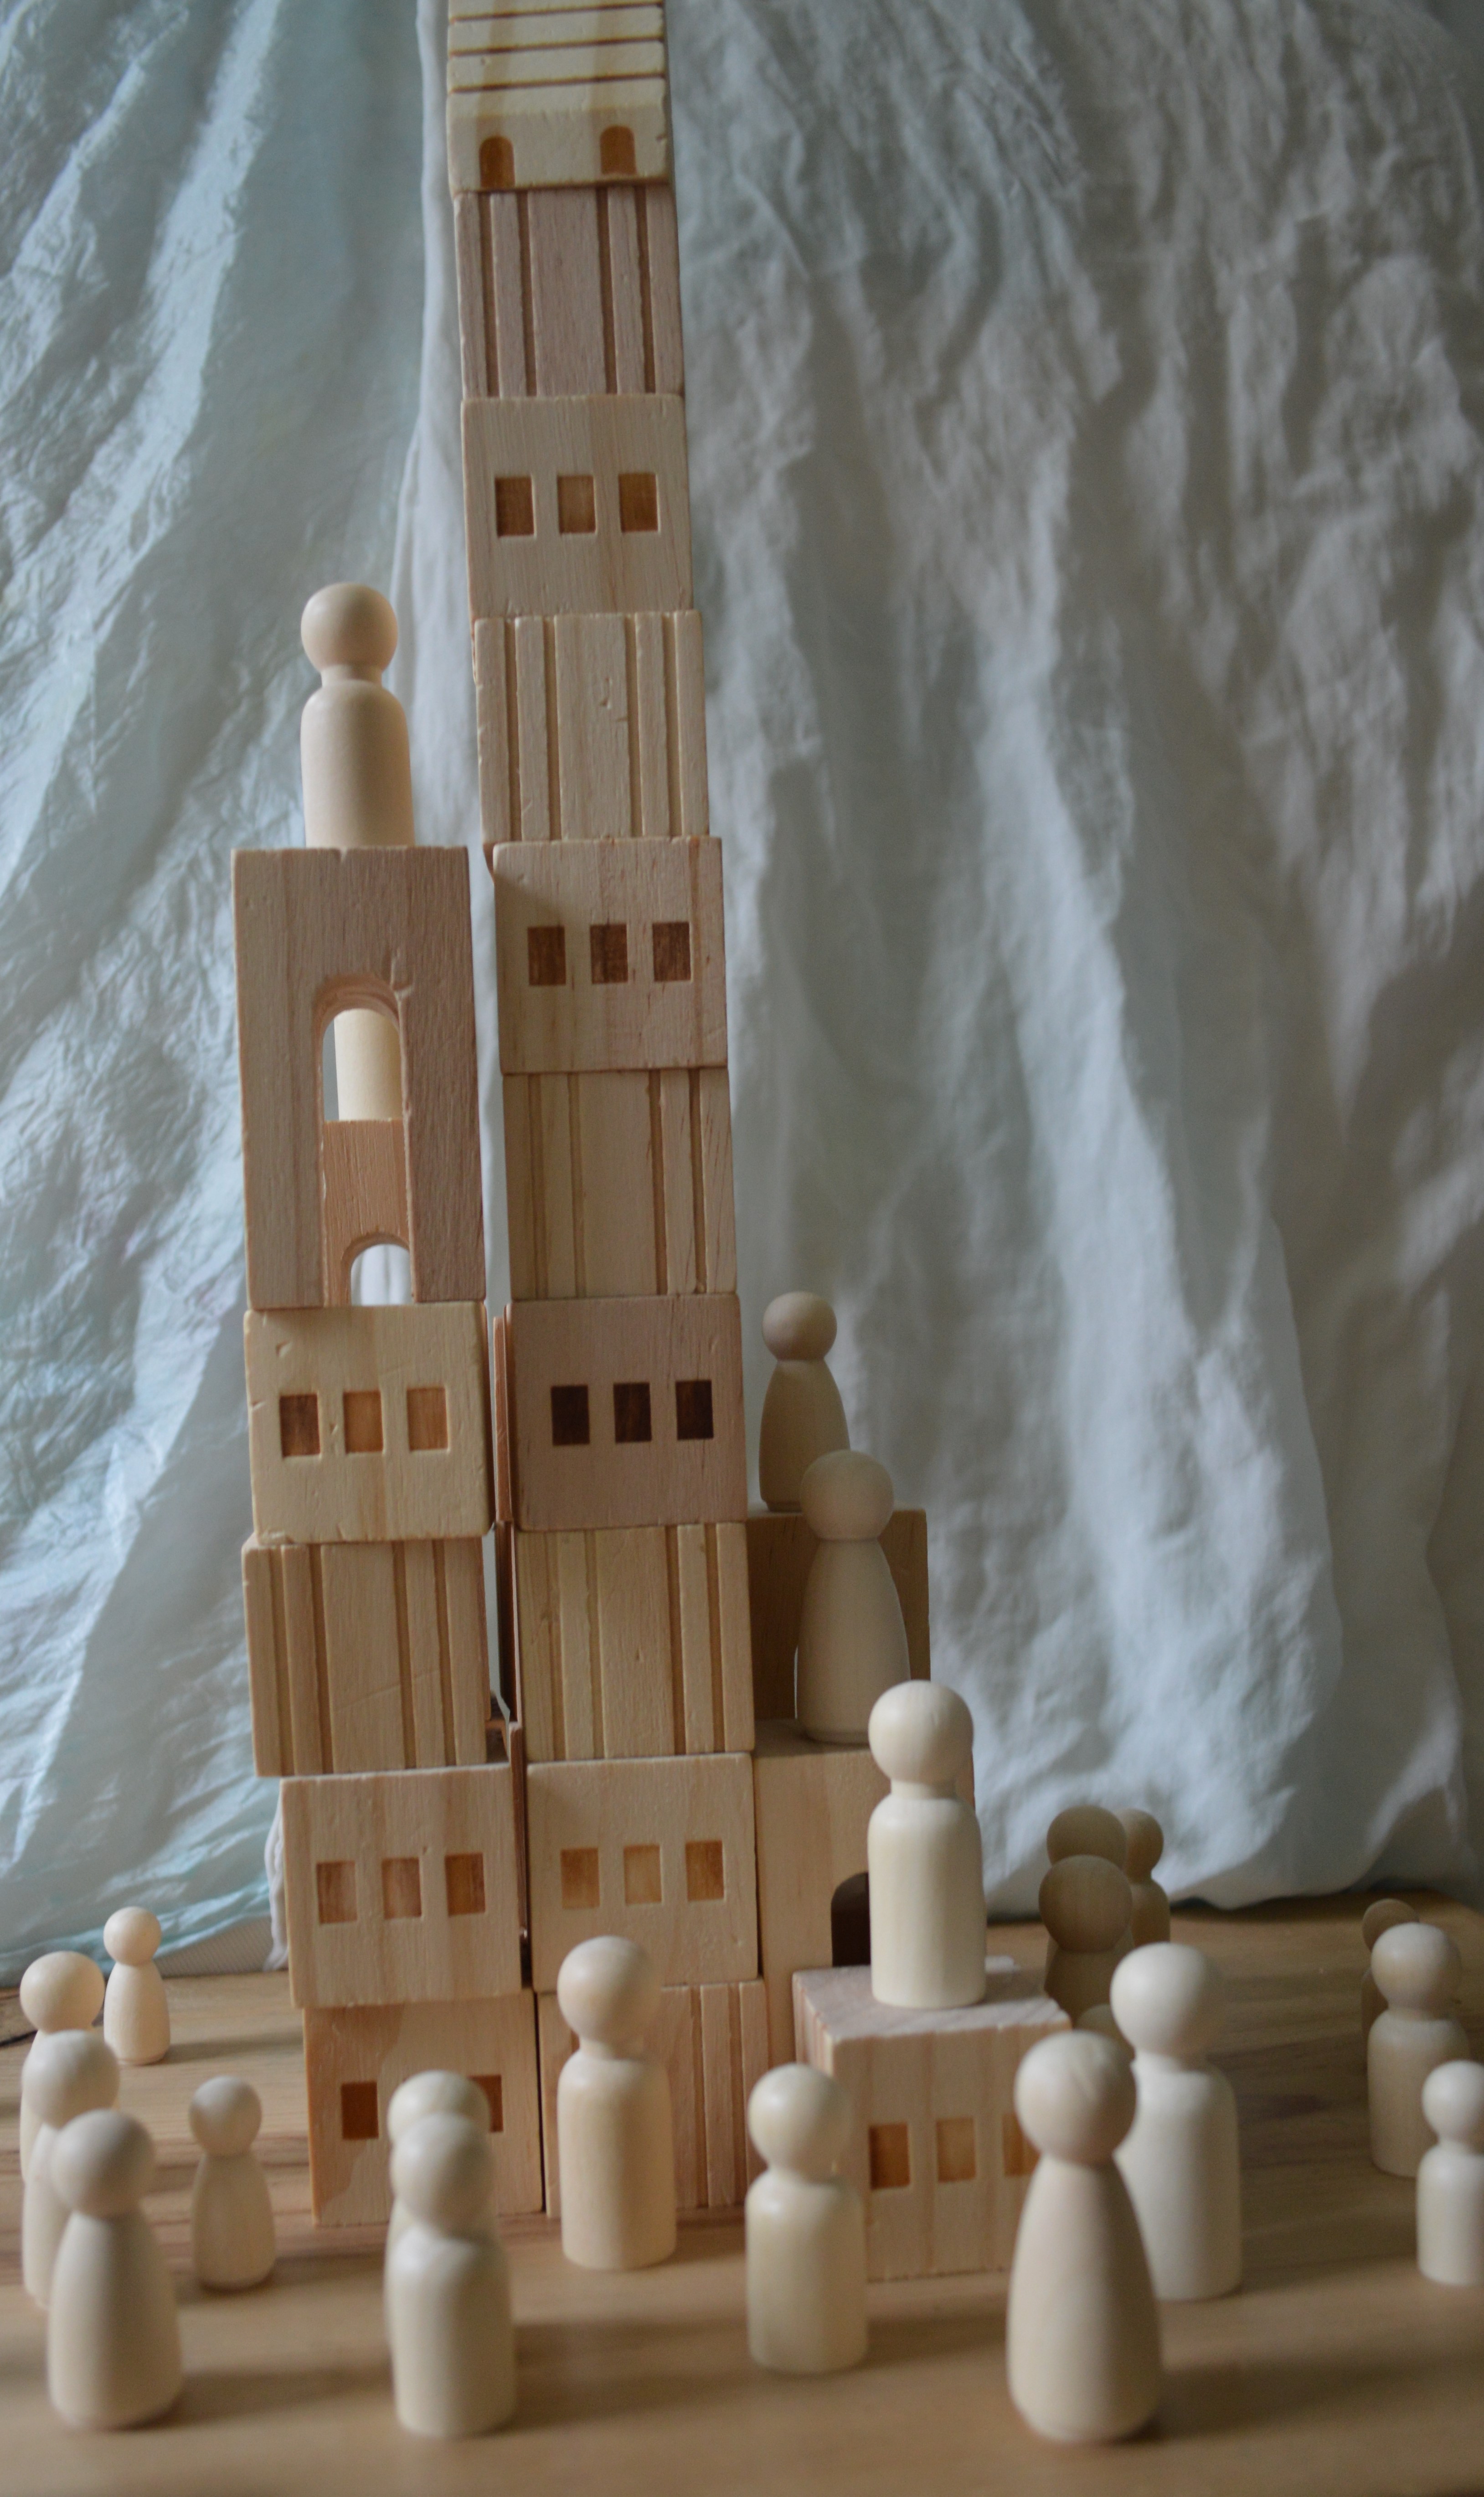 Peg dolls and blocks represent the tower of Babel being built.